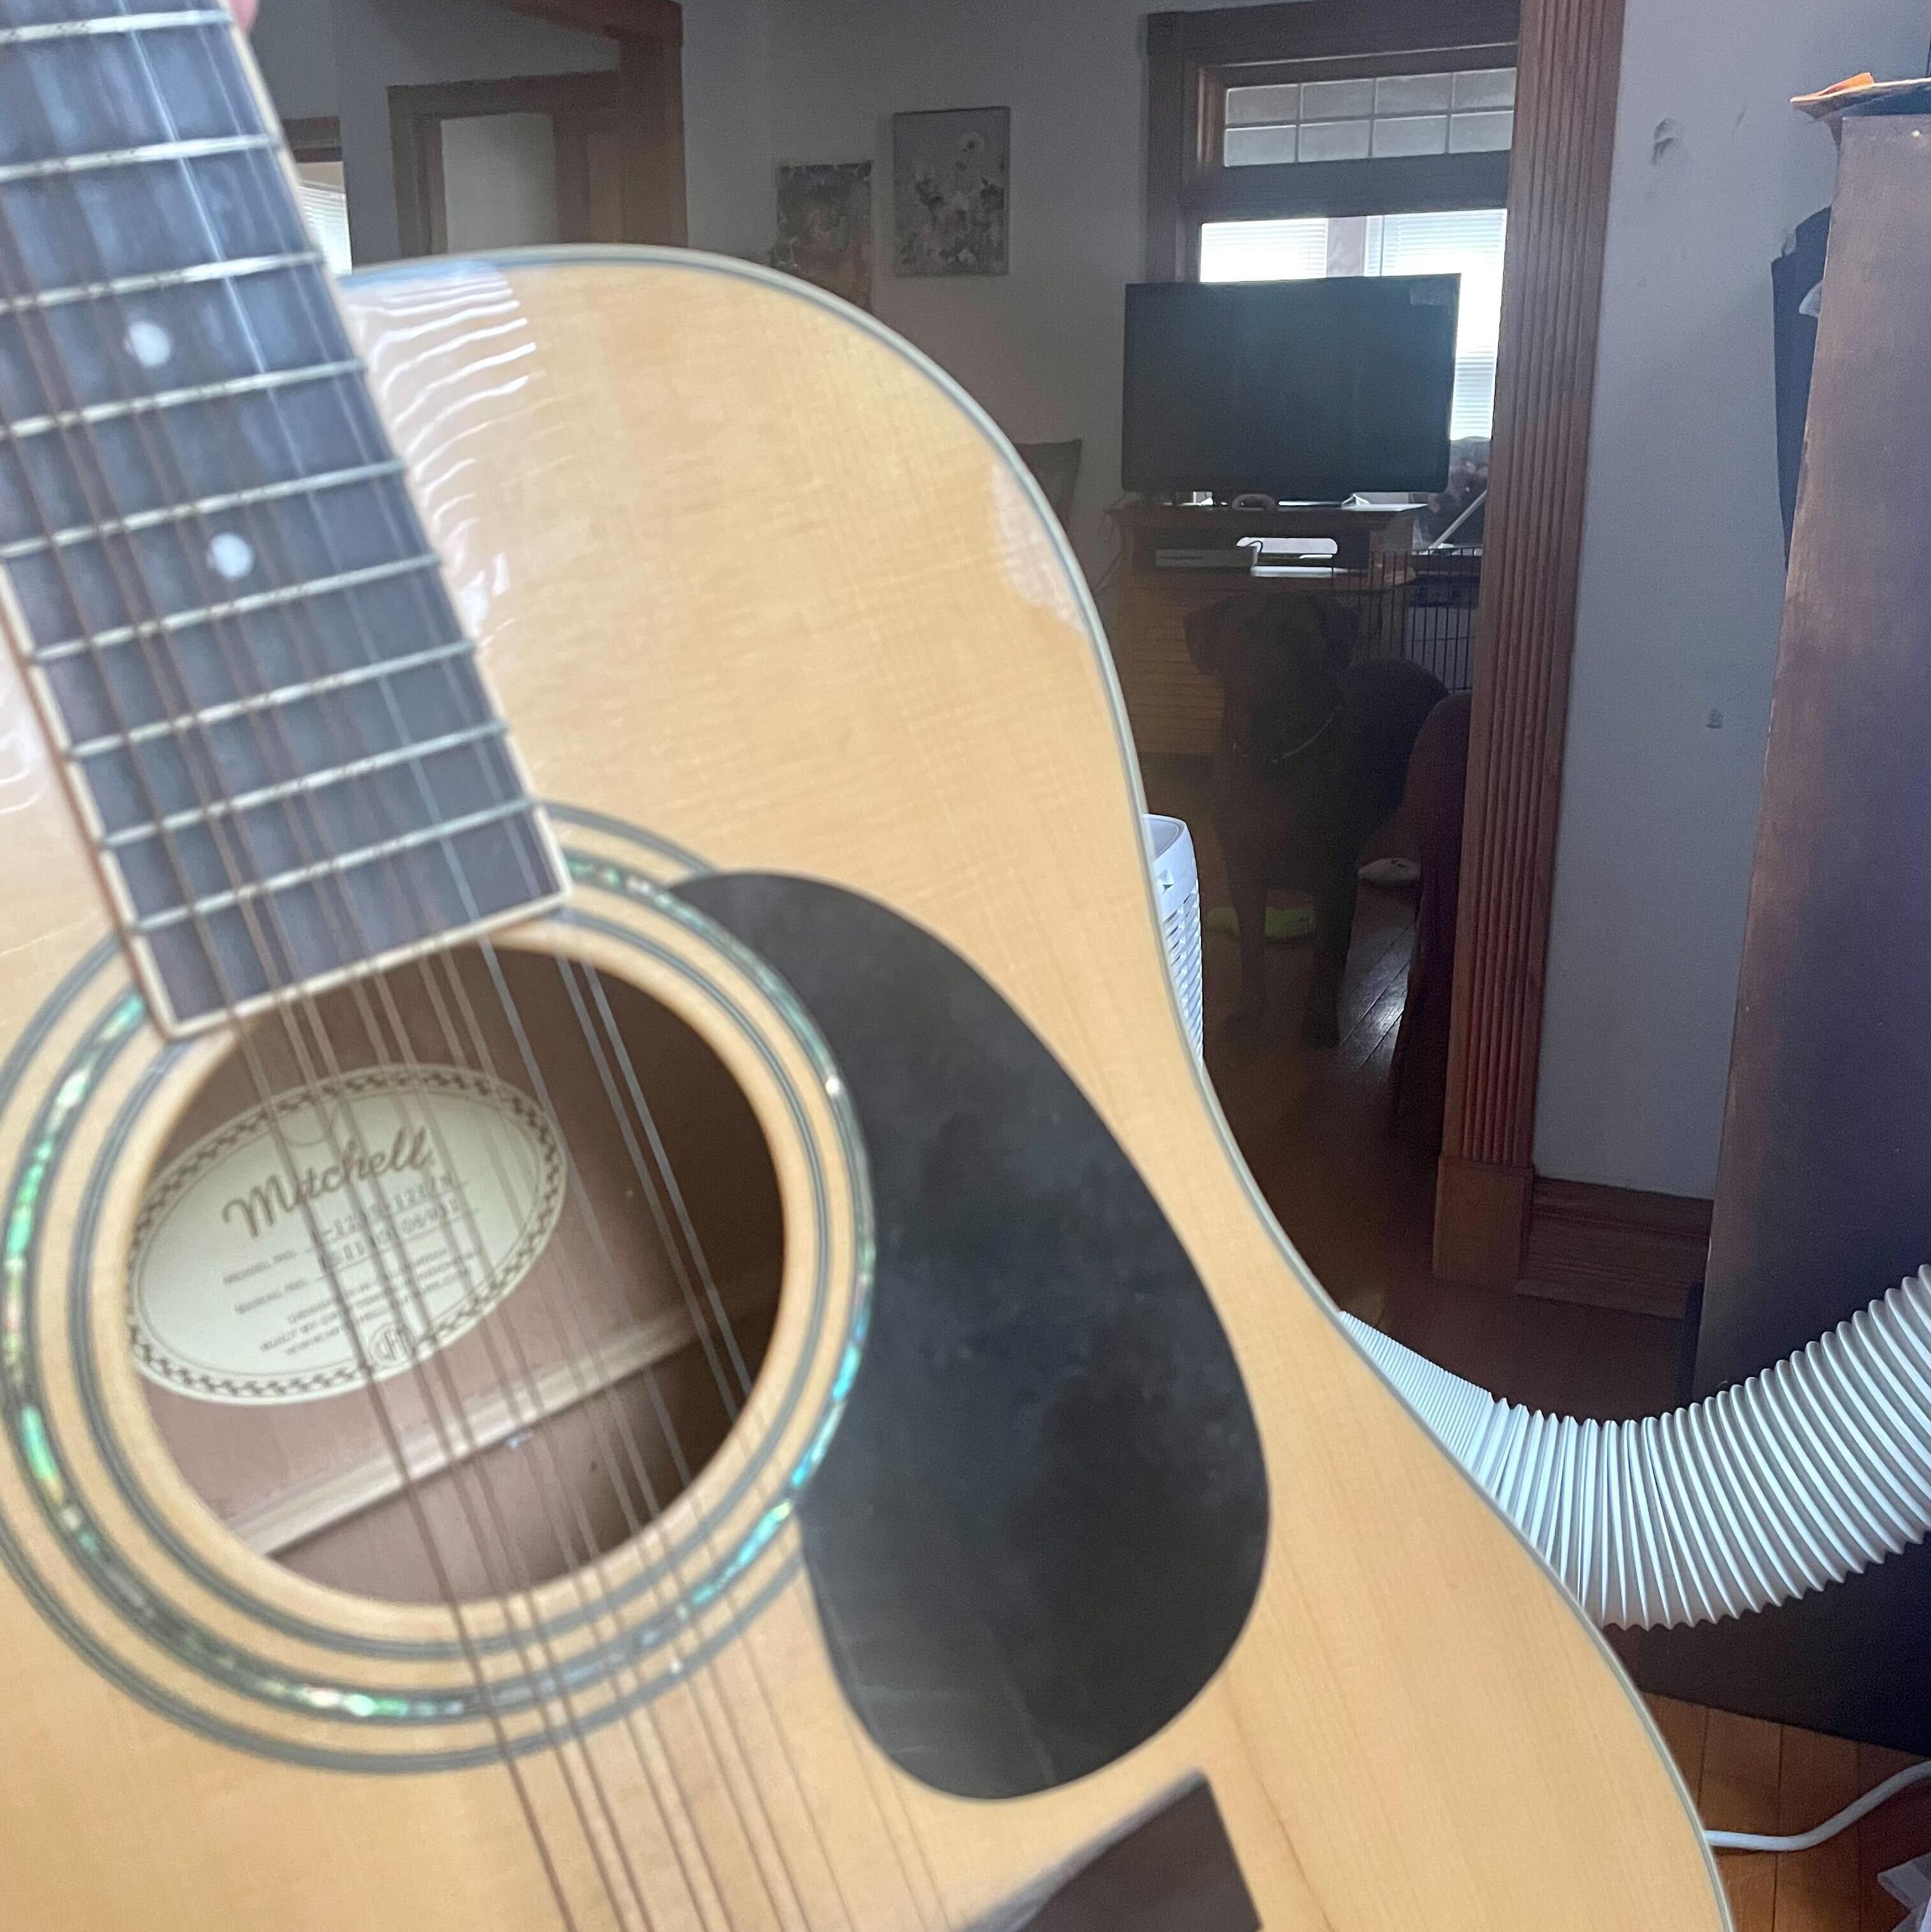 A photo of a wooden 12 string guitar and pick upon a gaming seat. 